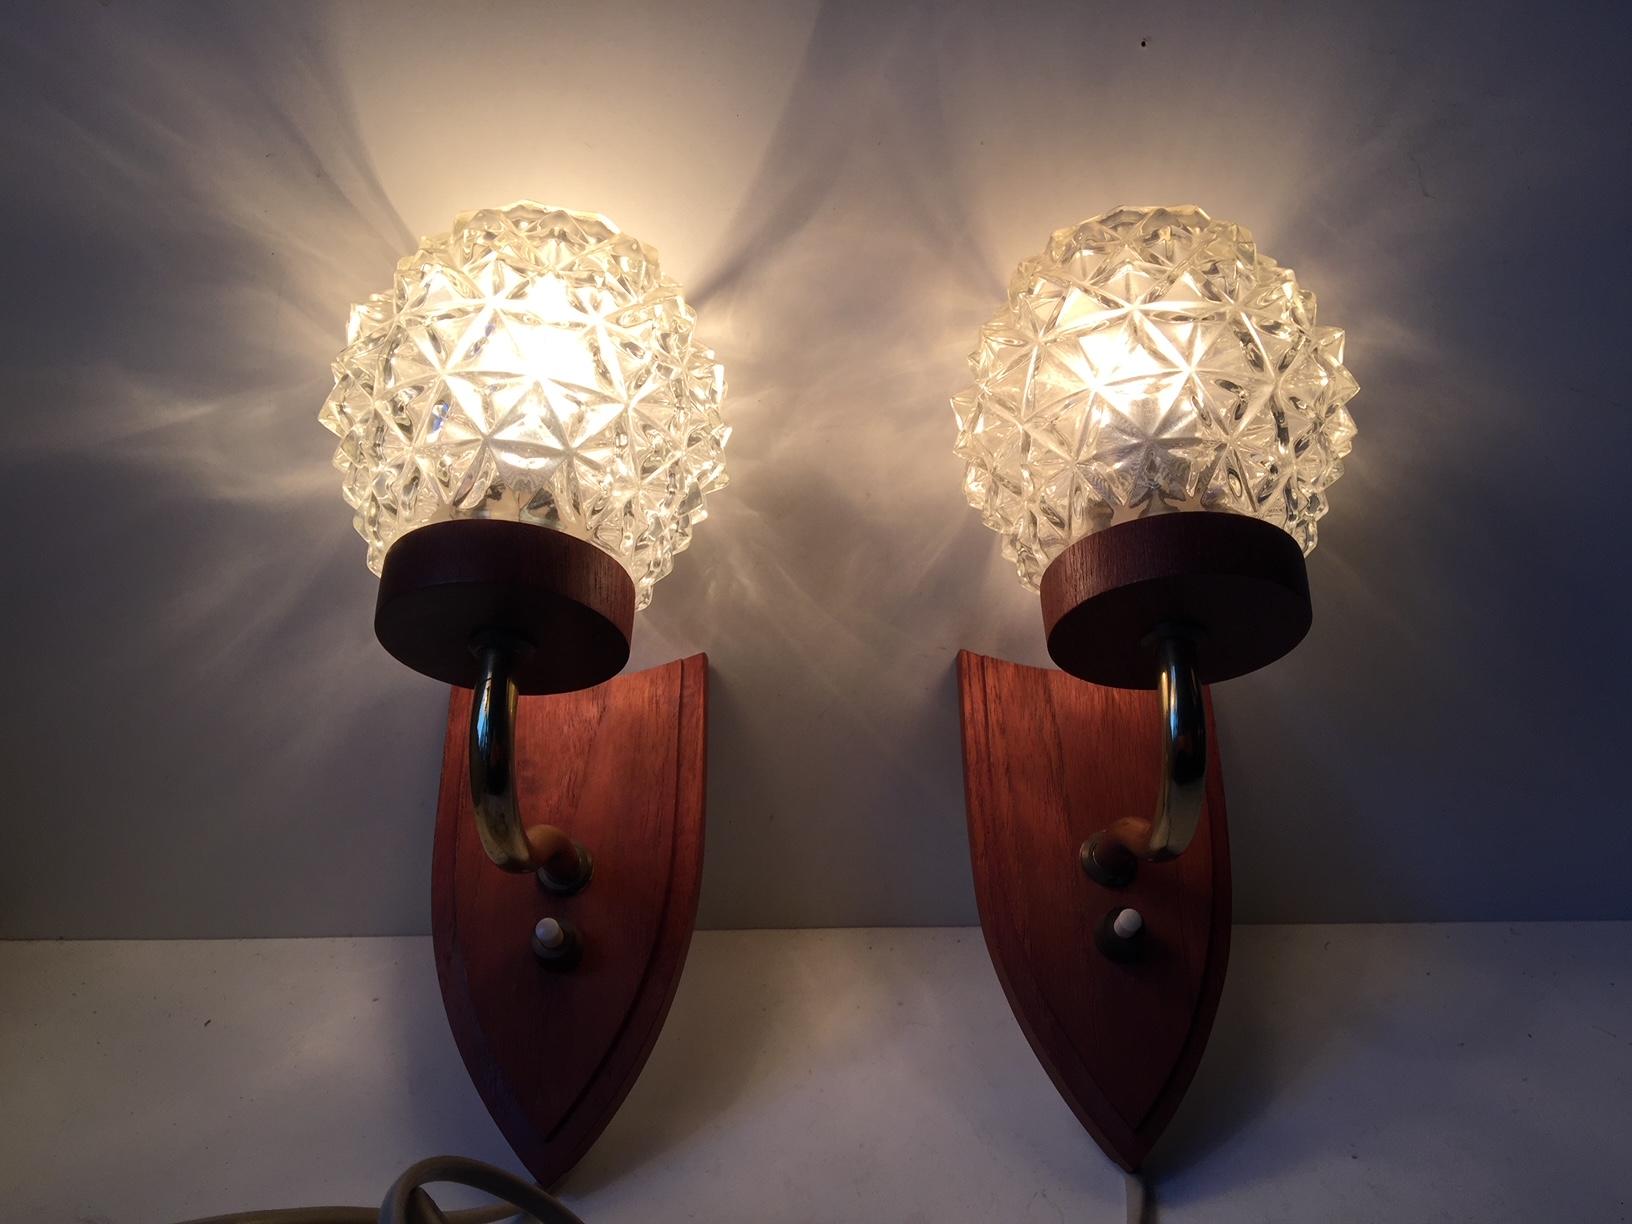 Mid-Century Modern Vintage Scandinavian Wall Sconces in Teak and Cut Glass, 1960s For Sale